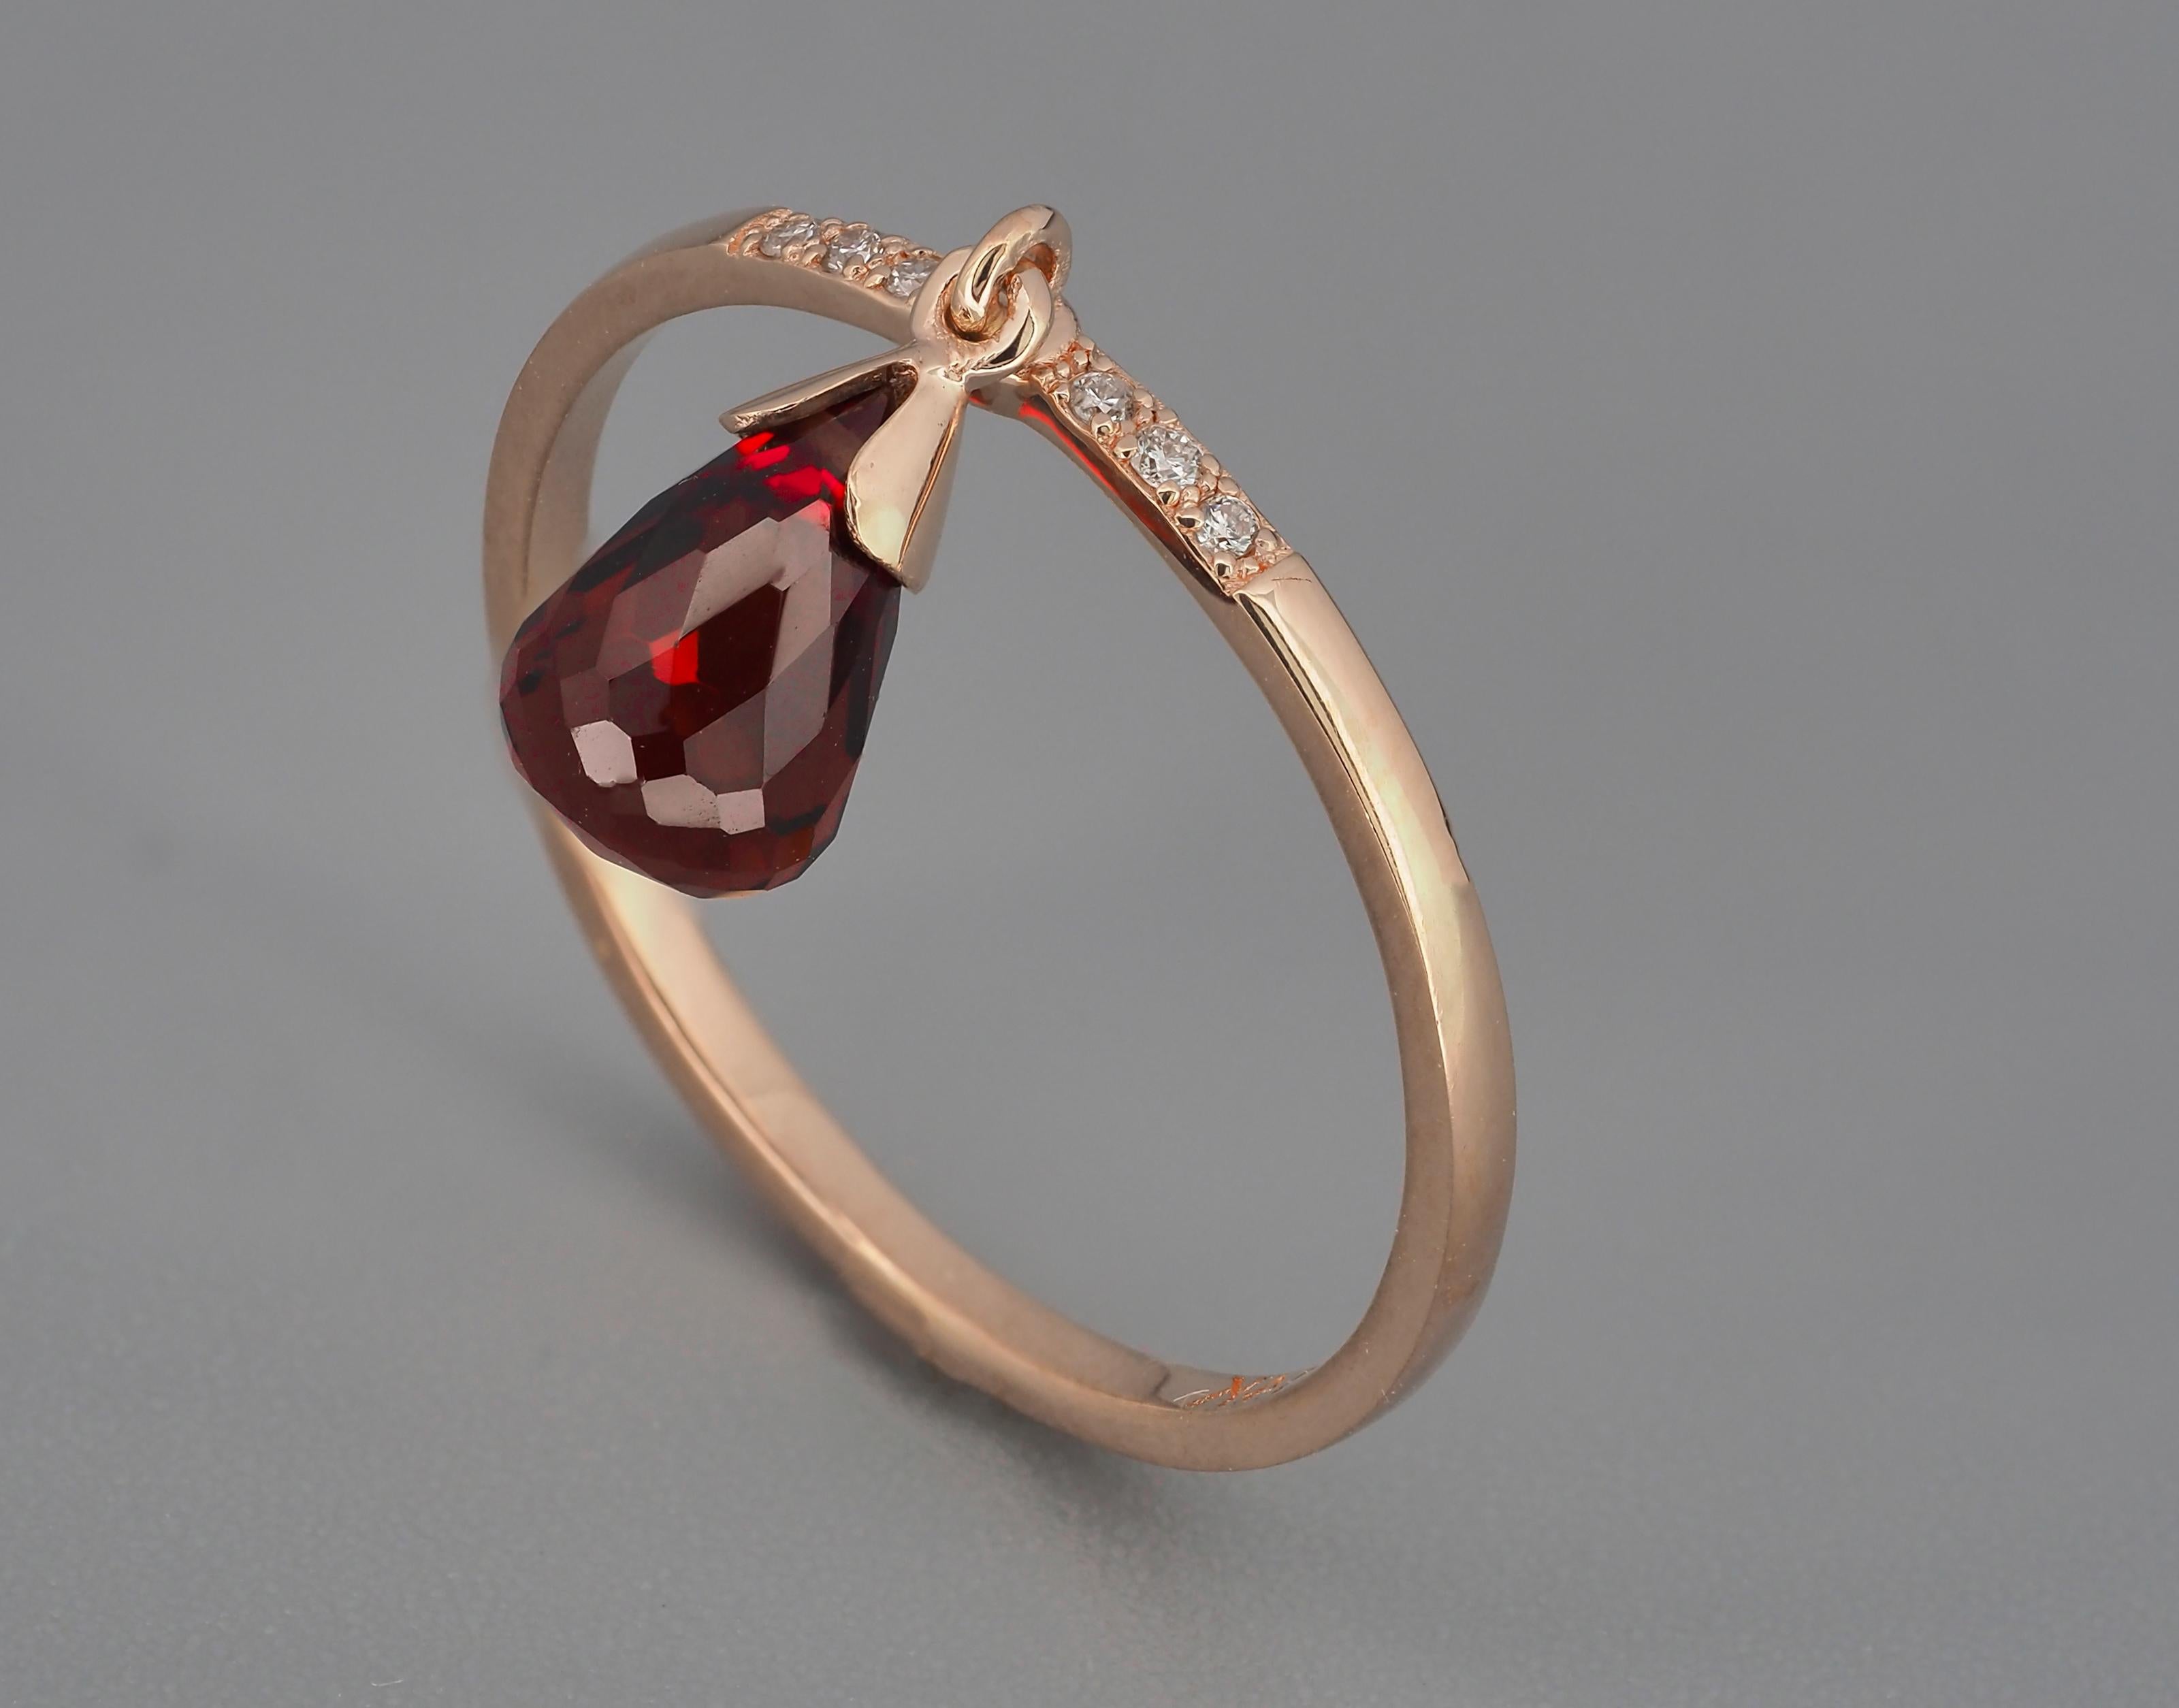 For Sale:  14k Gold Ring with Briolette Cut Garnet and Diamonds 9